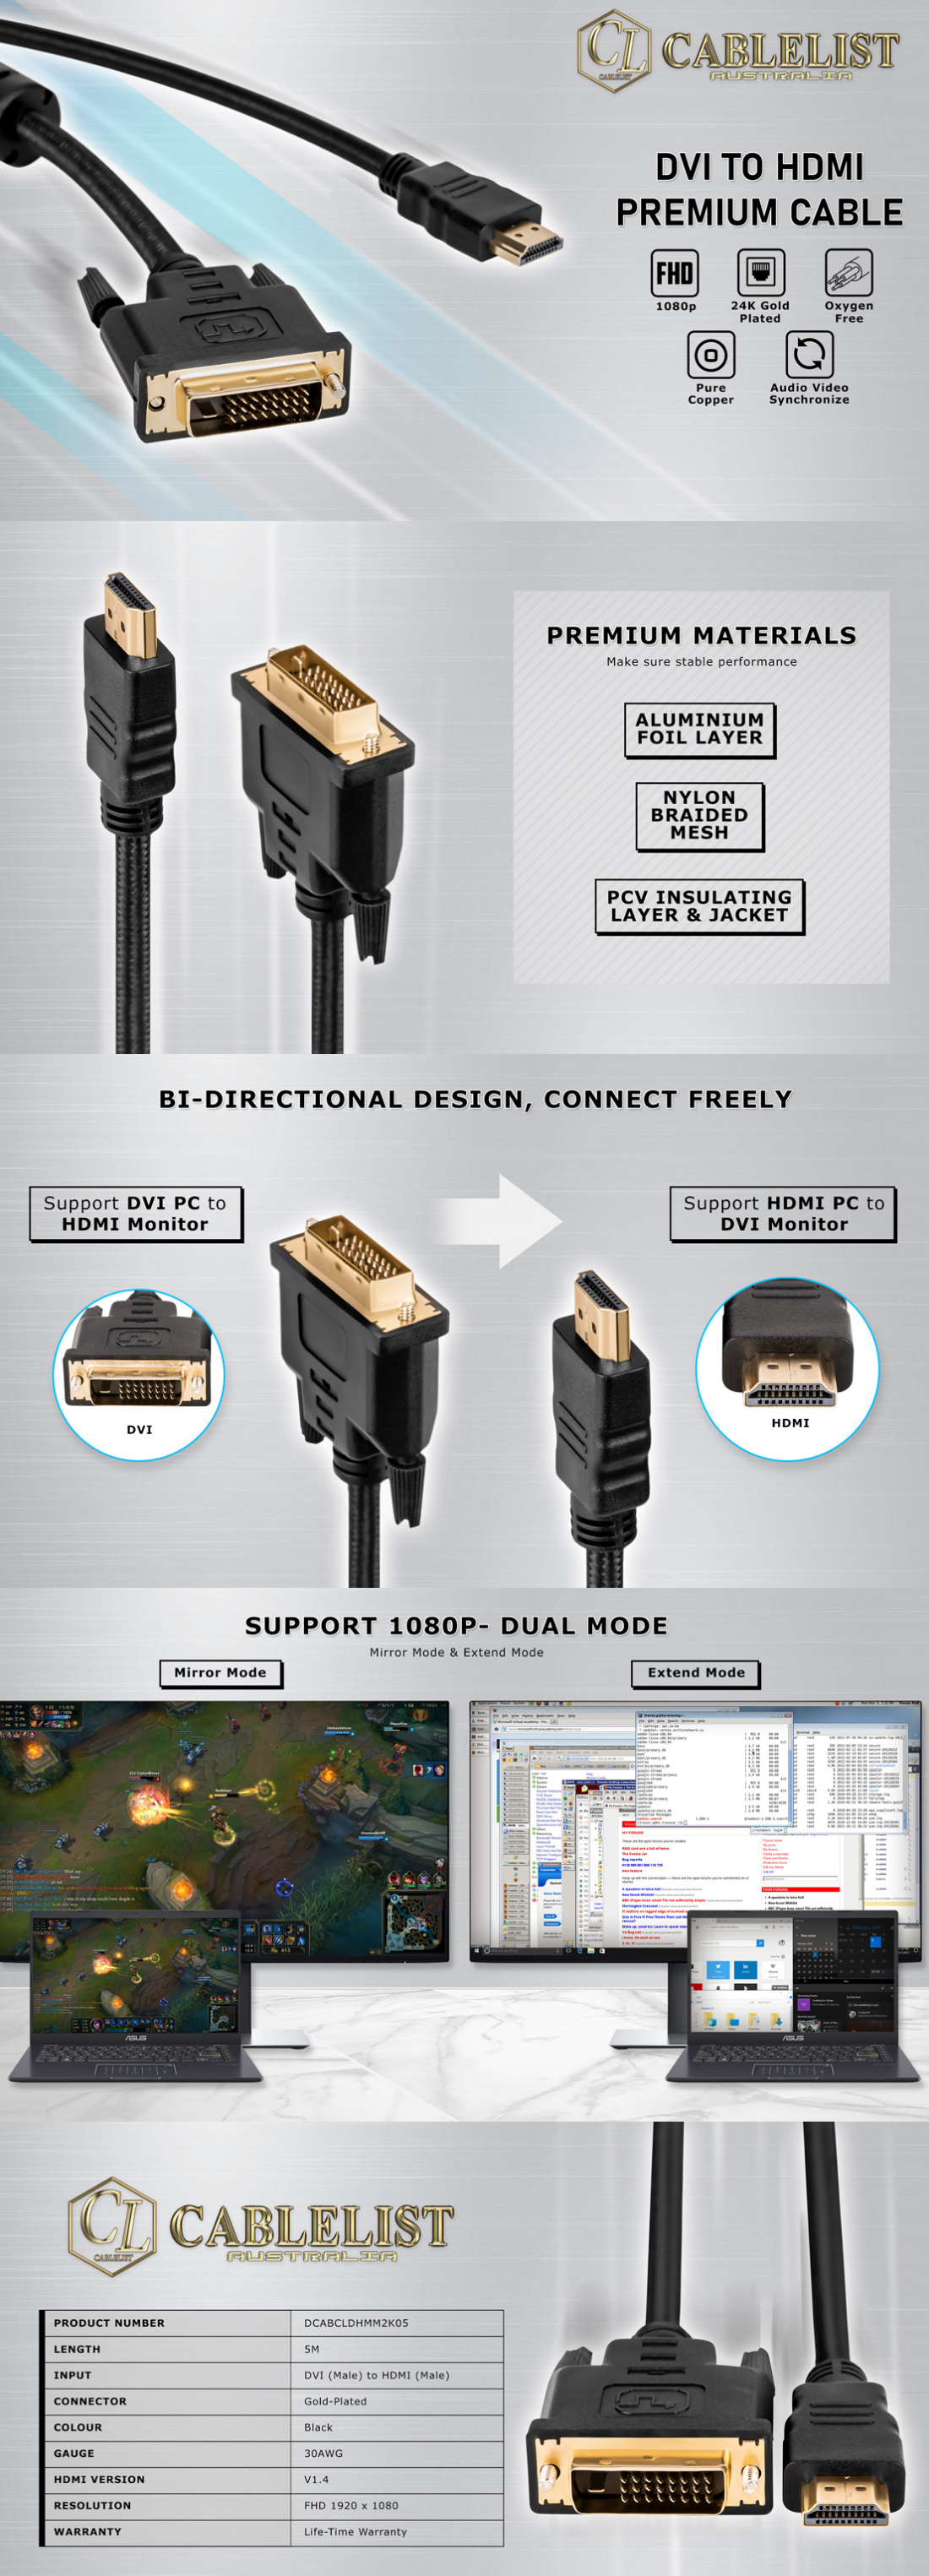 HDMI-Cables-Cablelist-2K-DVI-to-HDMI-Male-to-Male-5m-Cable-2